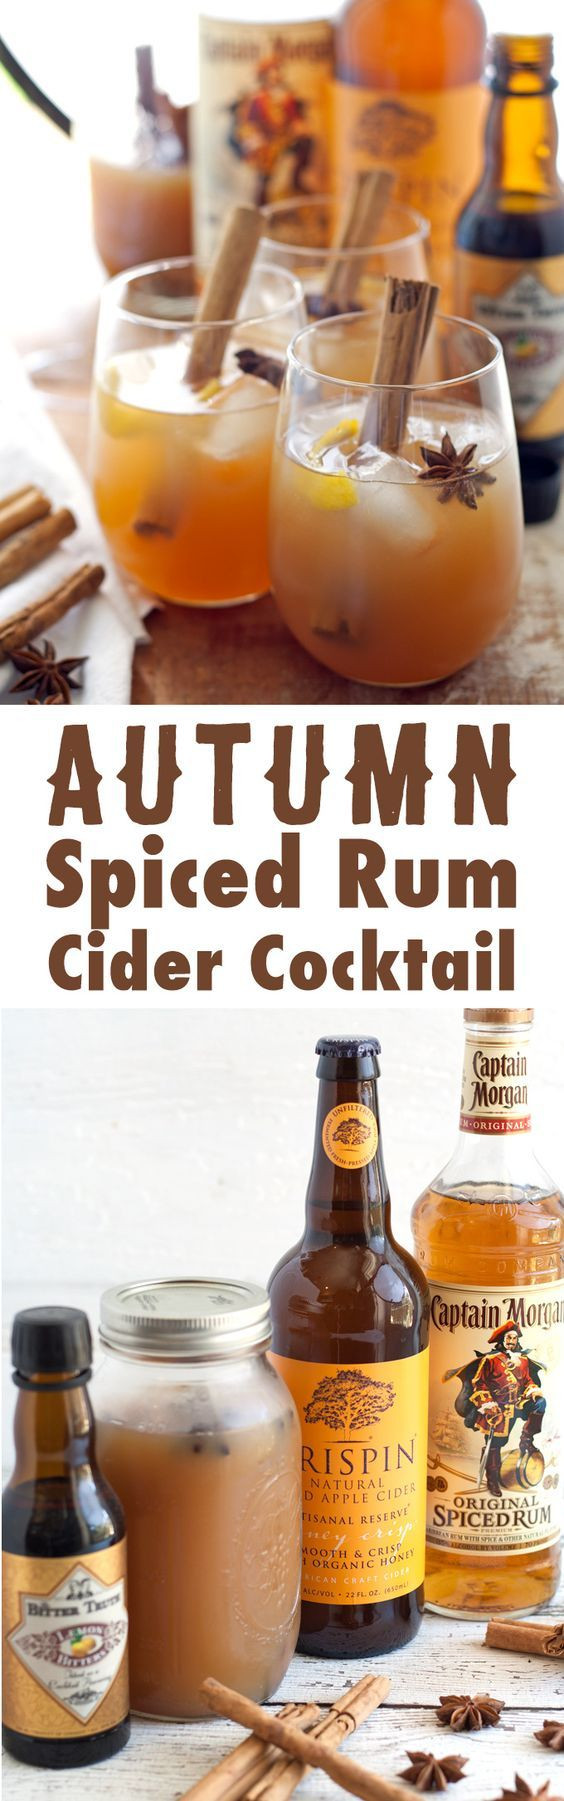 Fall Rum Drinks
 17 Best images about Drinks on Pinterest